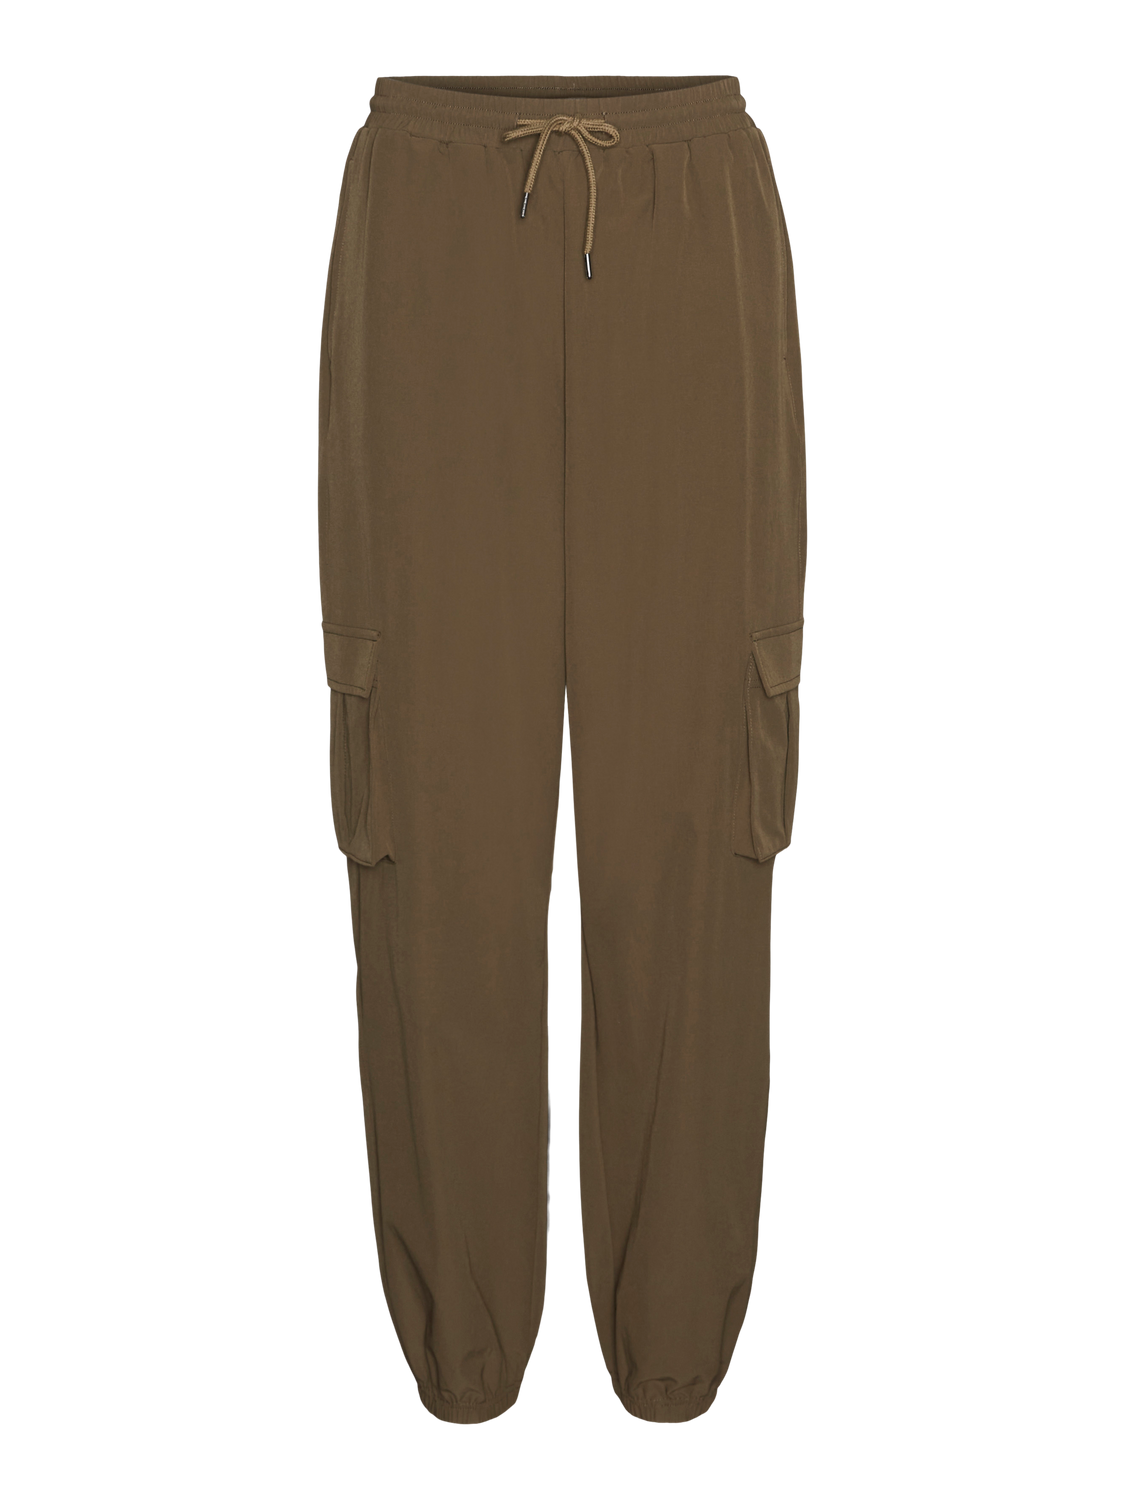 VMKIMBERLY Pants - Capers